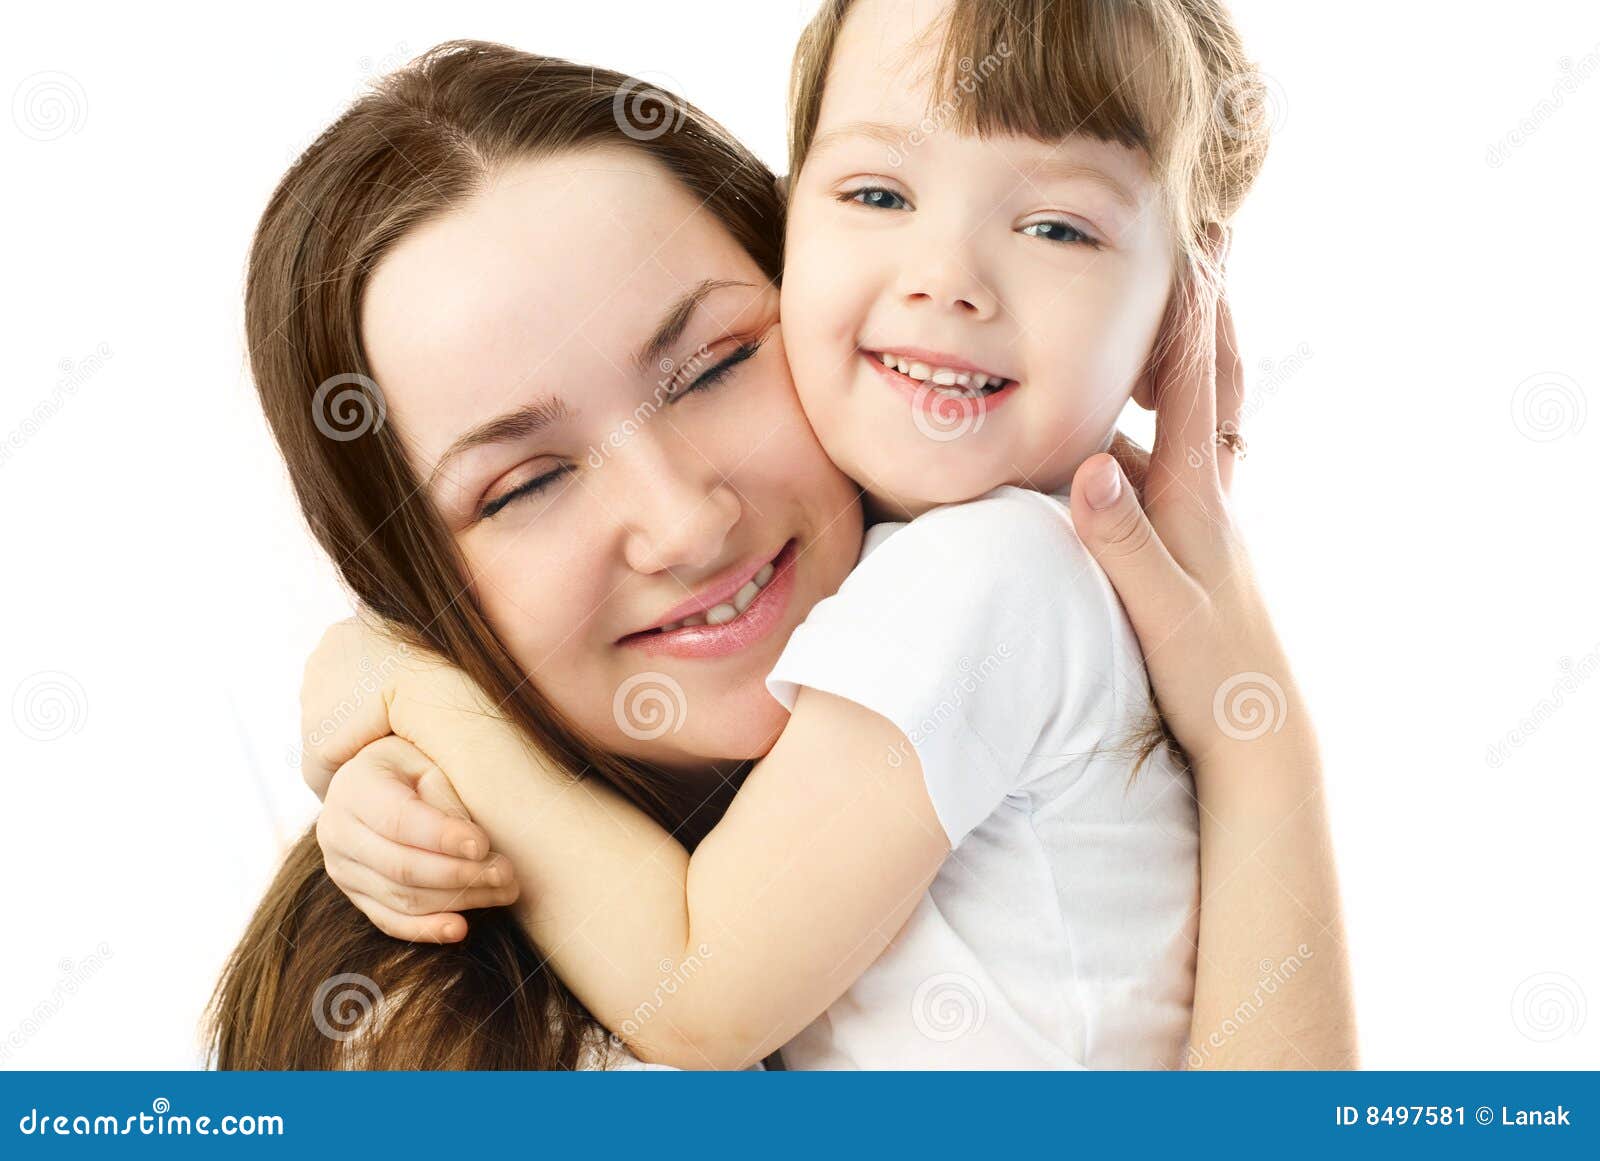 Mother And Daughter Embracing Stock Image Image Of Happiness Embrace 8497581 